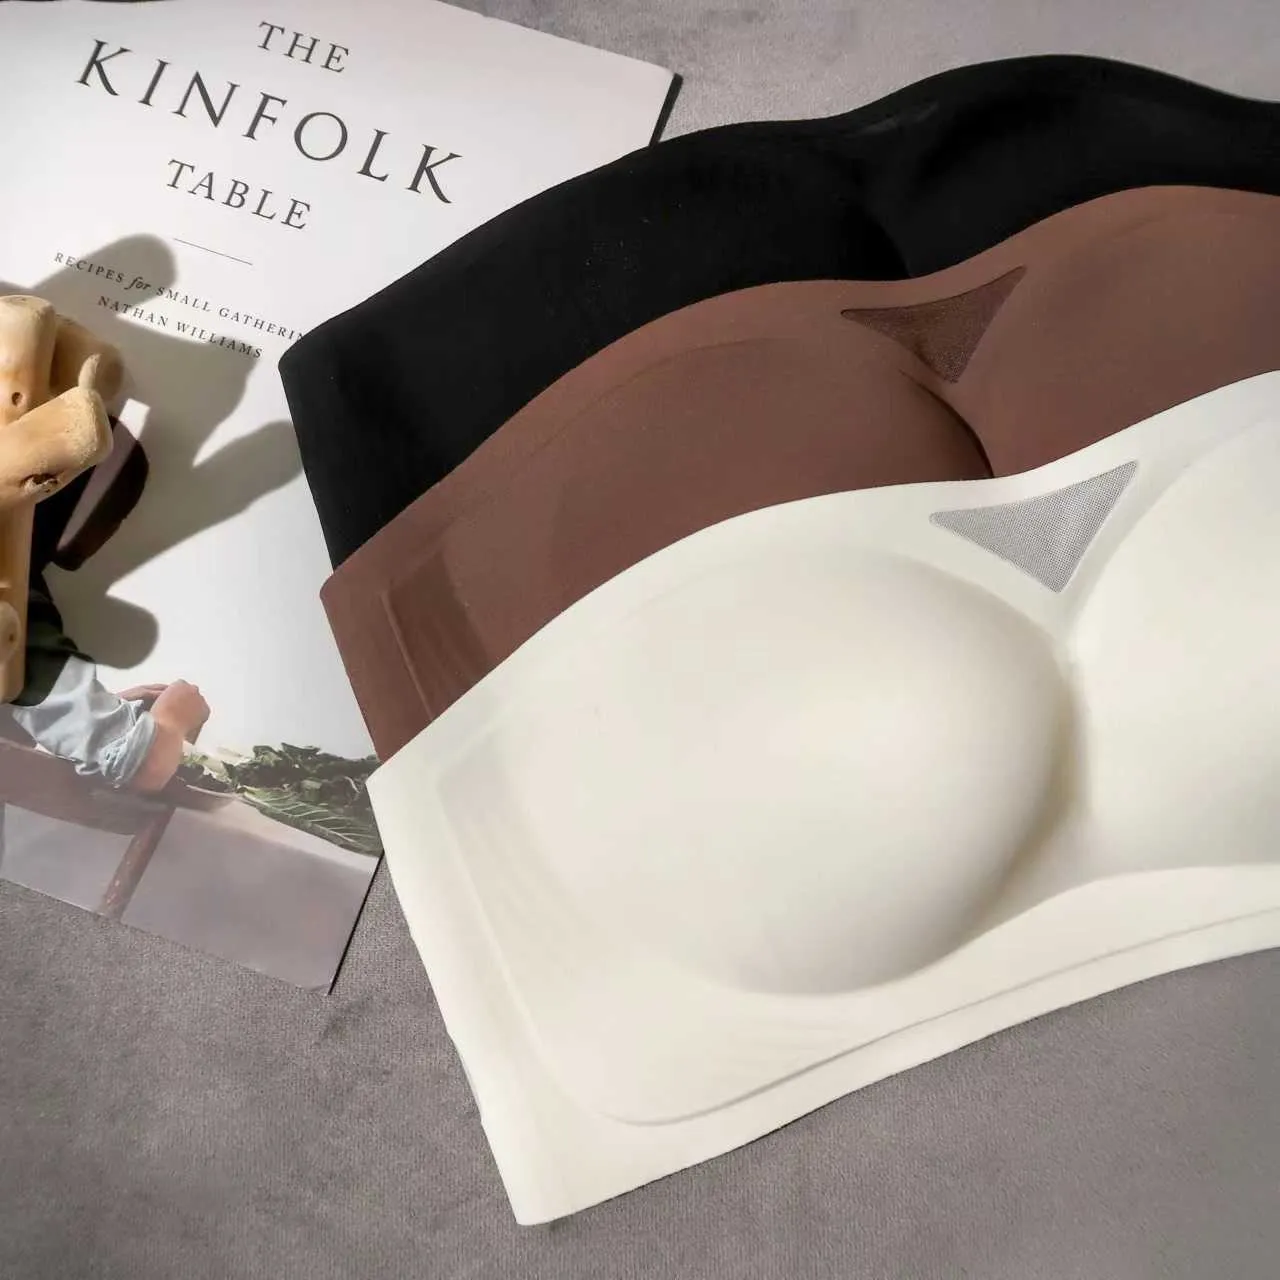 Genuine Style Strapless Maternity Strapless Underwear With Invisible Bra  Tube Top For Small Chest Gather From Nickyoung06, $11.89